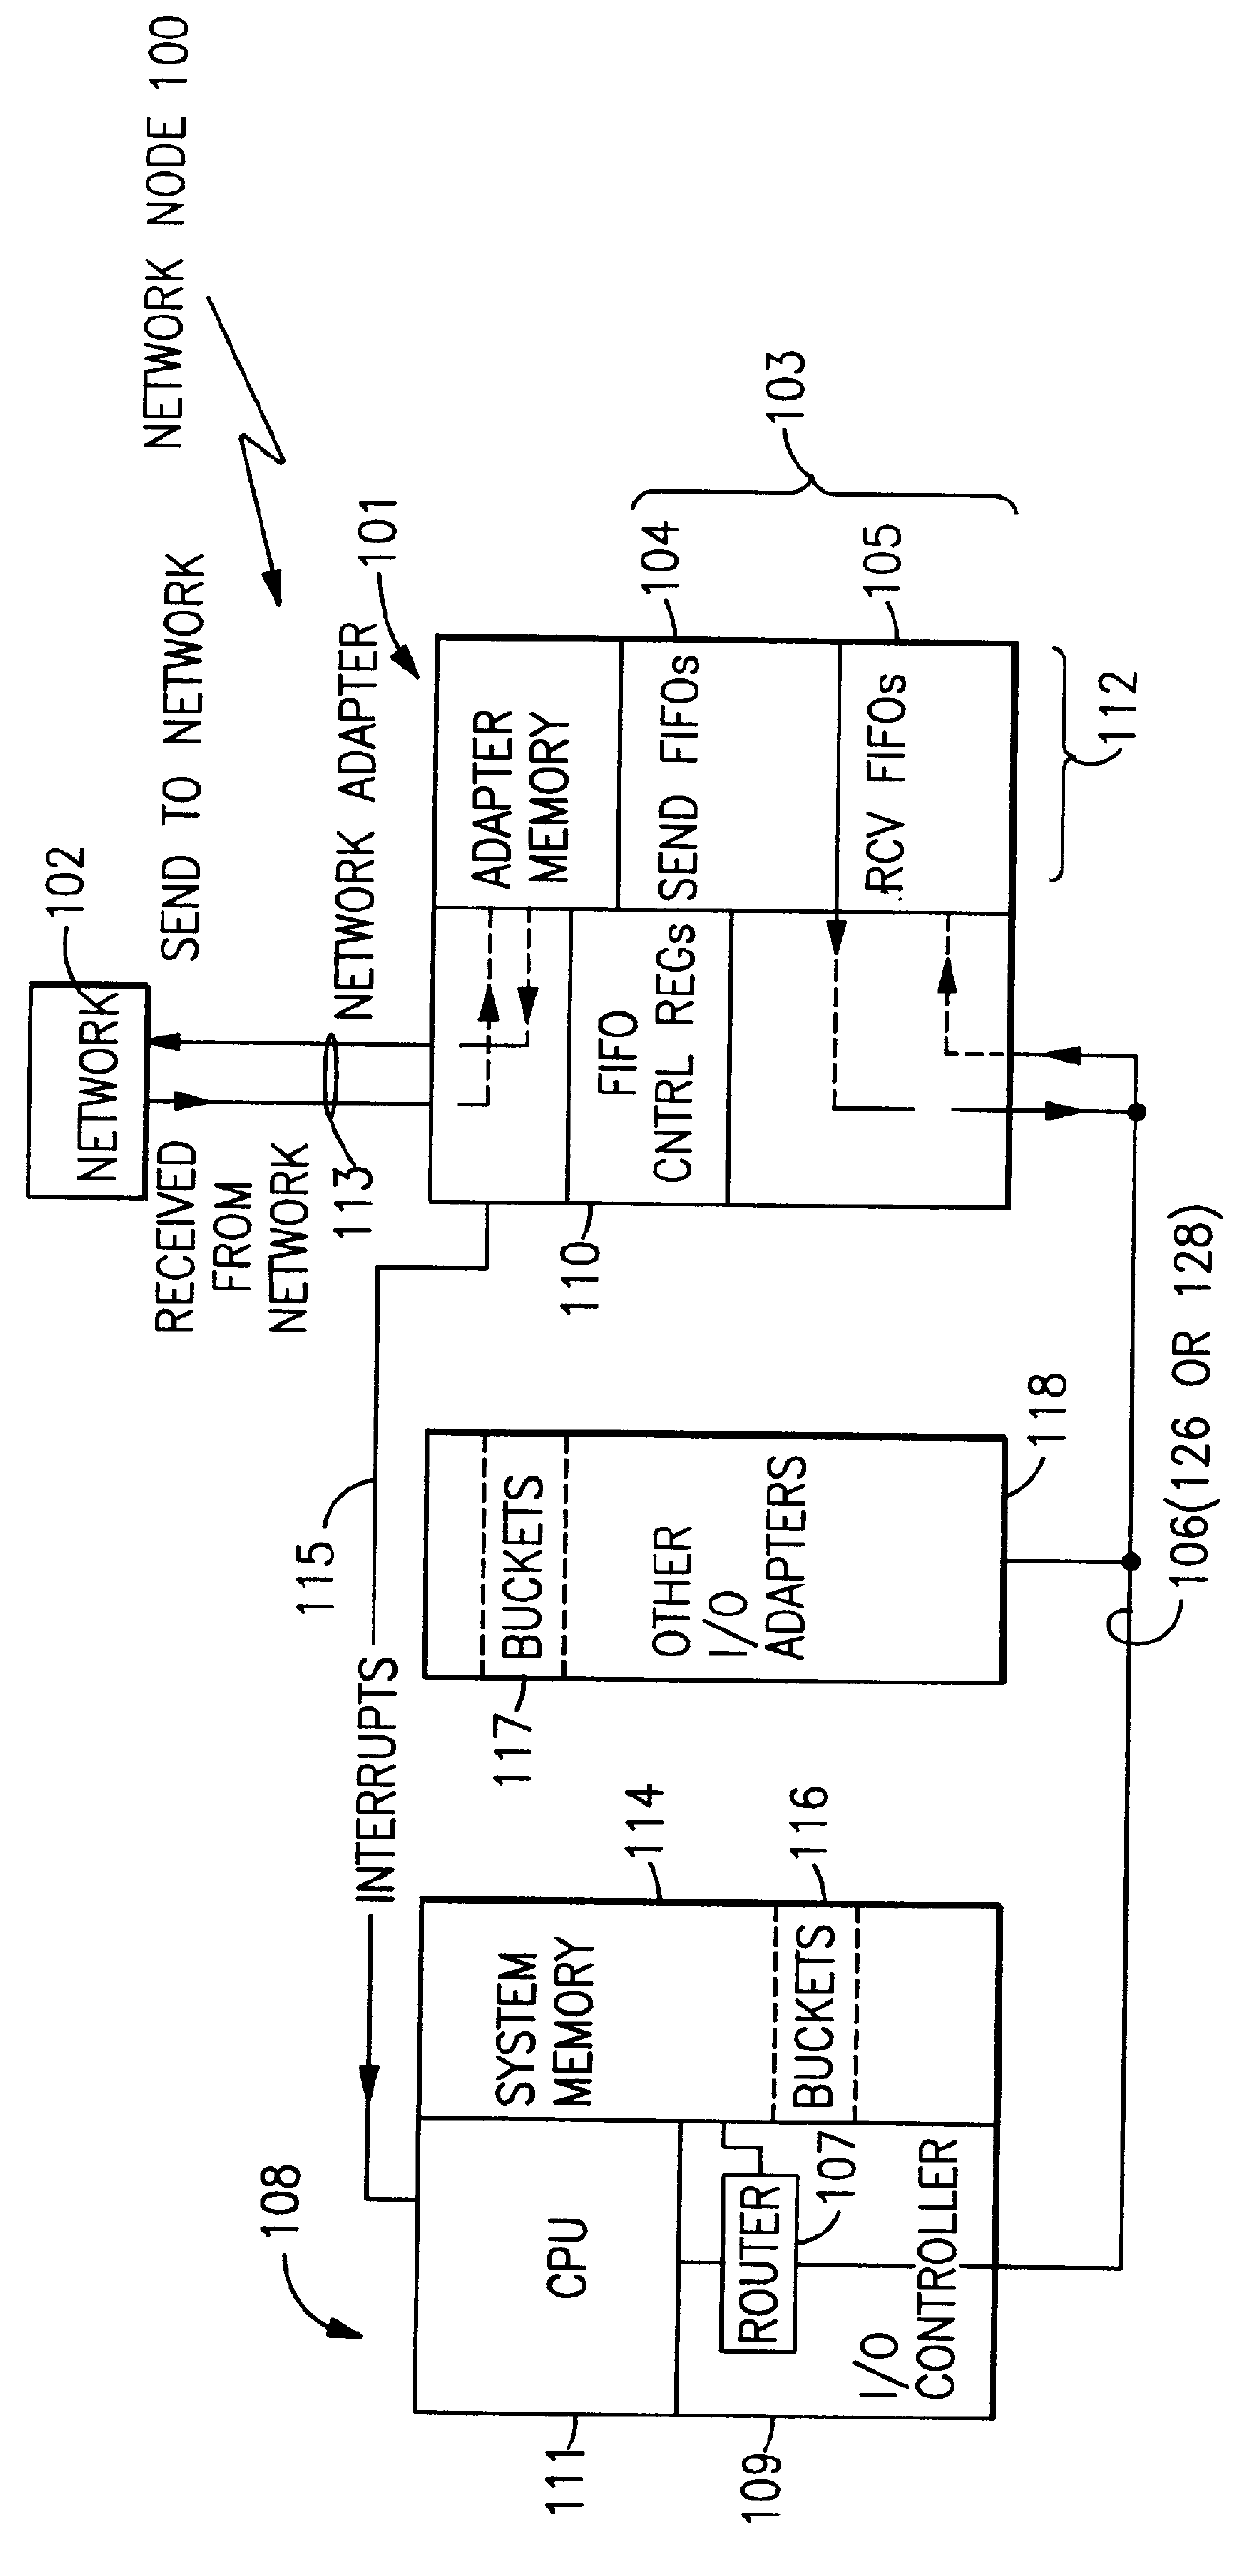 Multi-tasking adapter for parallel network applications